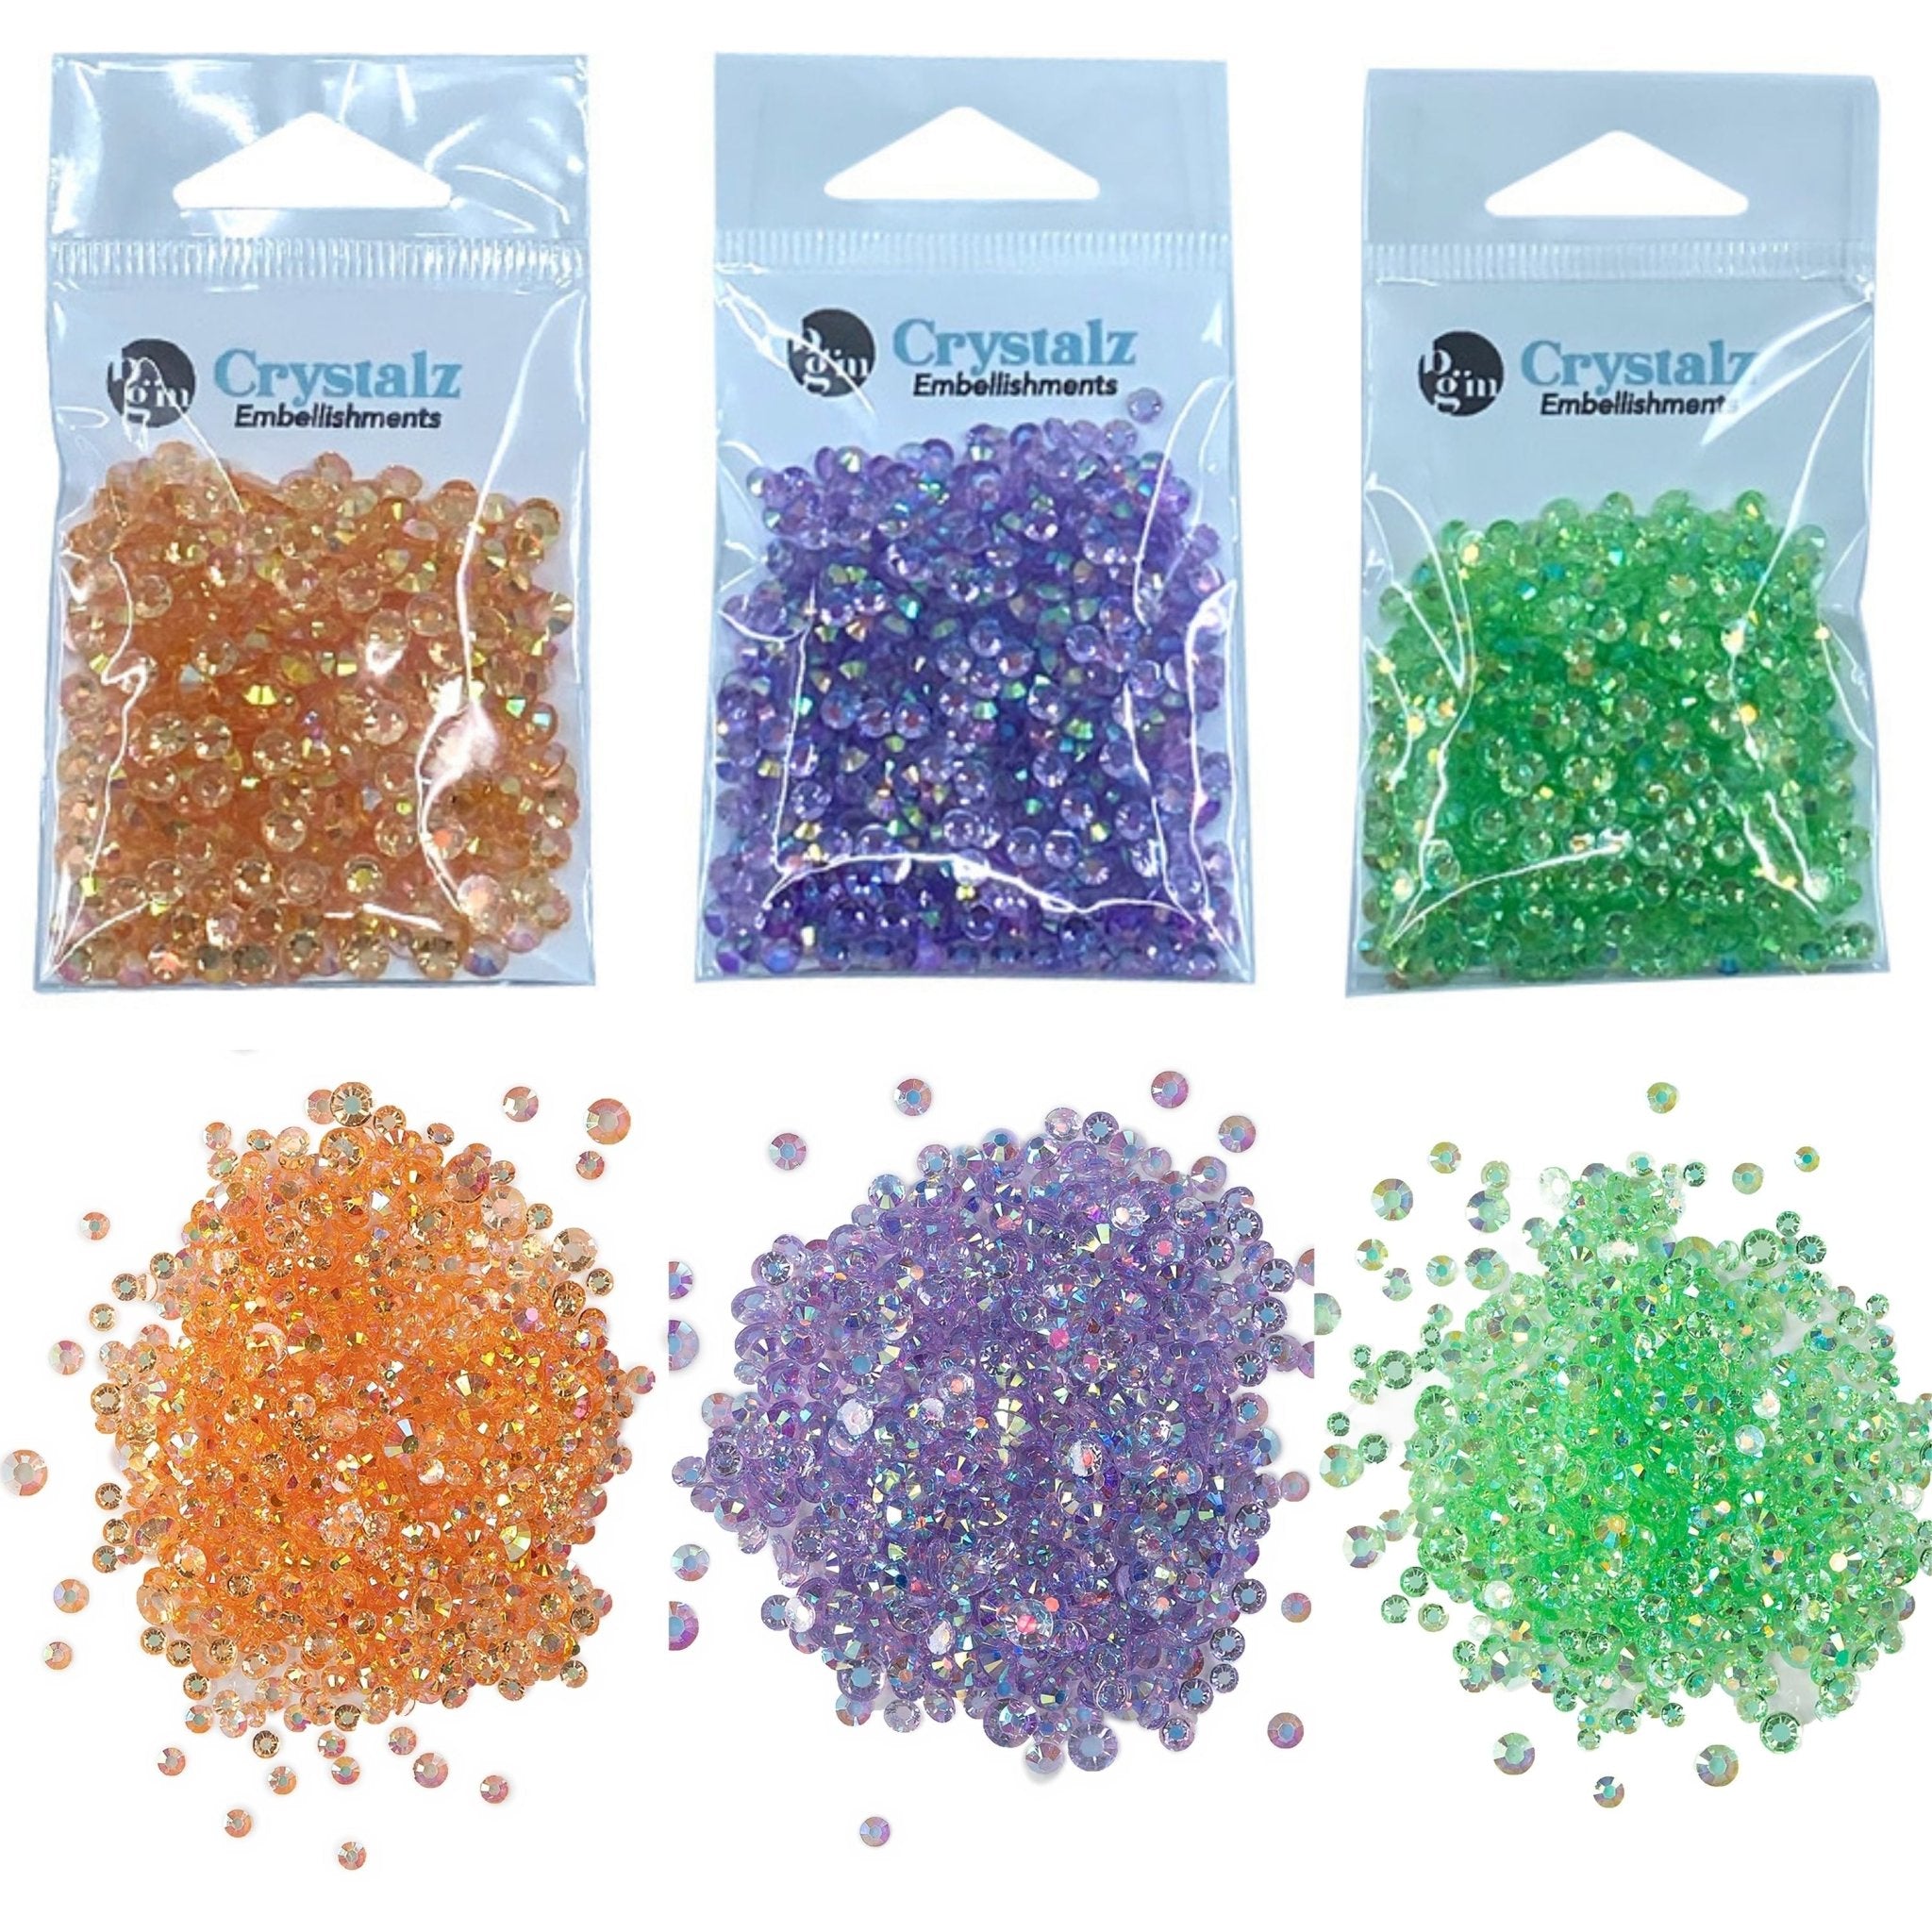 Buttons Galore Crystalz Iridescent Flat Back Gems for DIY Crafts, Scrapbooks, Paper Crafts - Tropical Colors 1200 Pieces - Buttons Galore and More